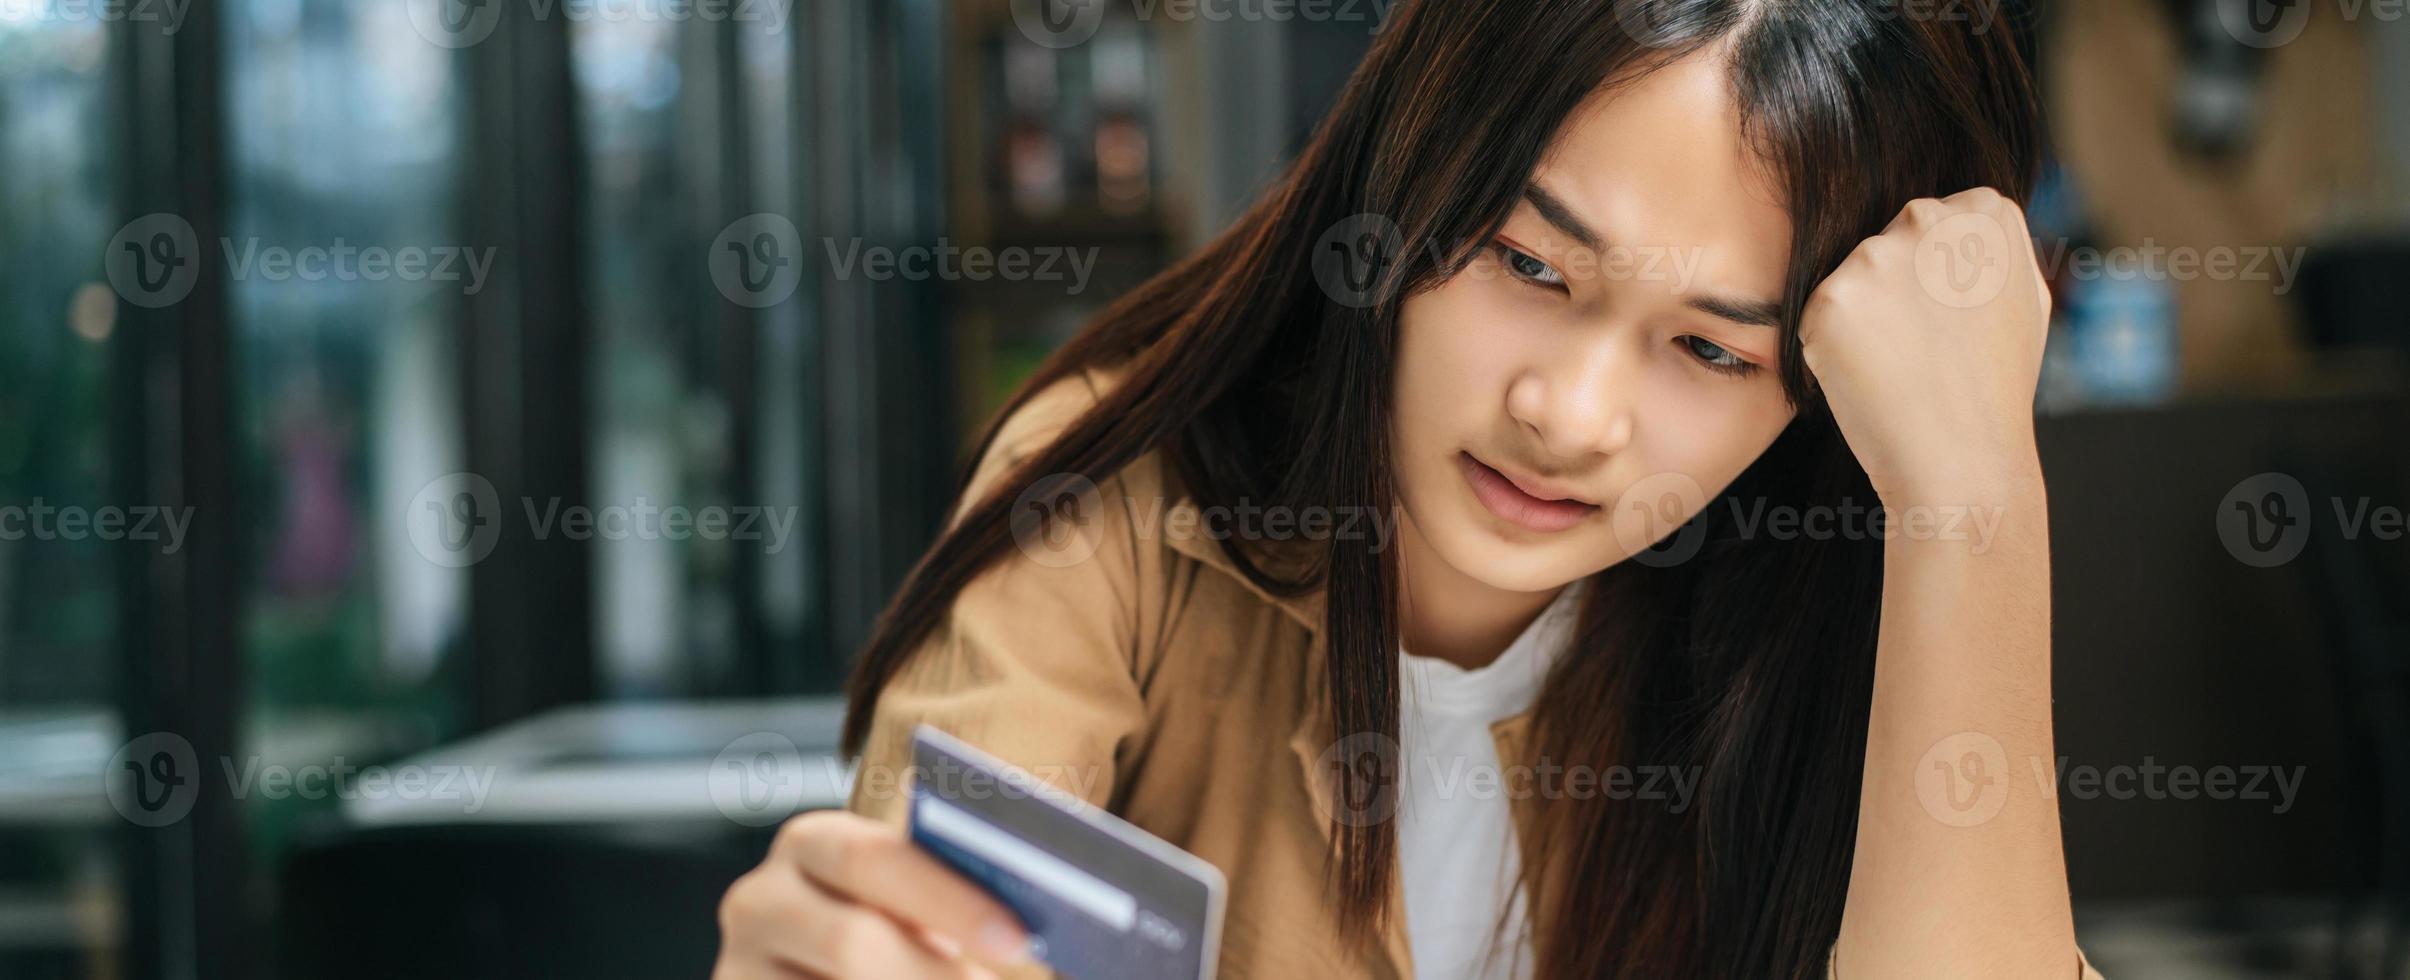 Young businesswoman paying order having contactless payment with cardit card photo